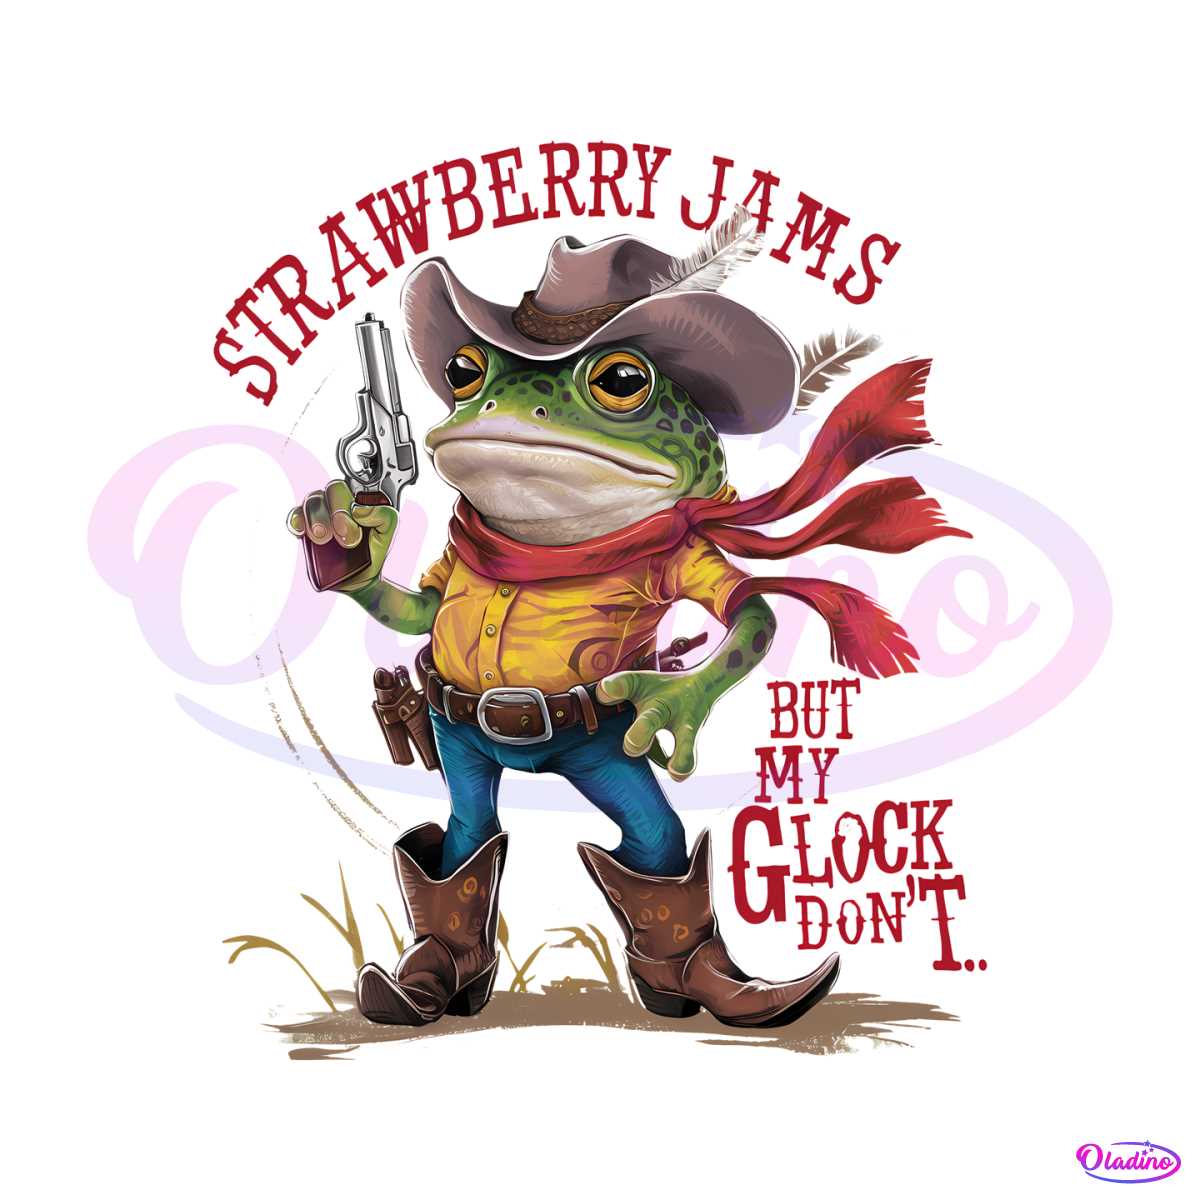 strawberry-jams-but-my-glock-dont-cowboy-frog-png